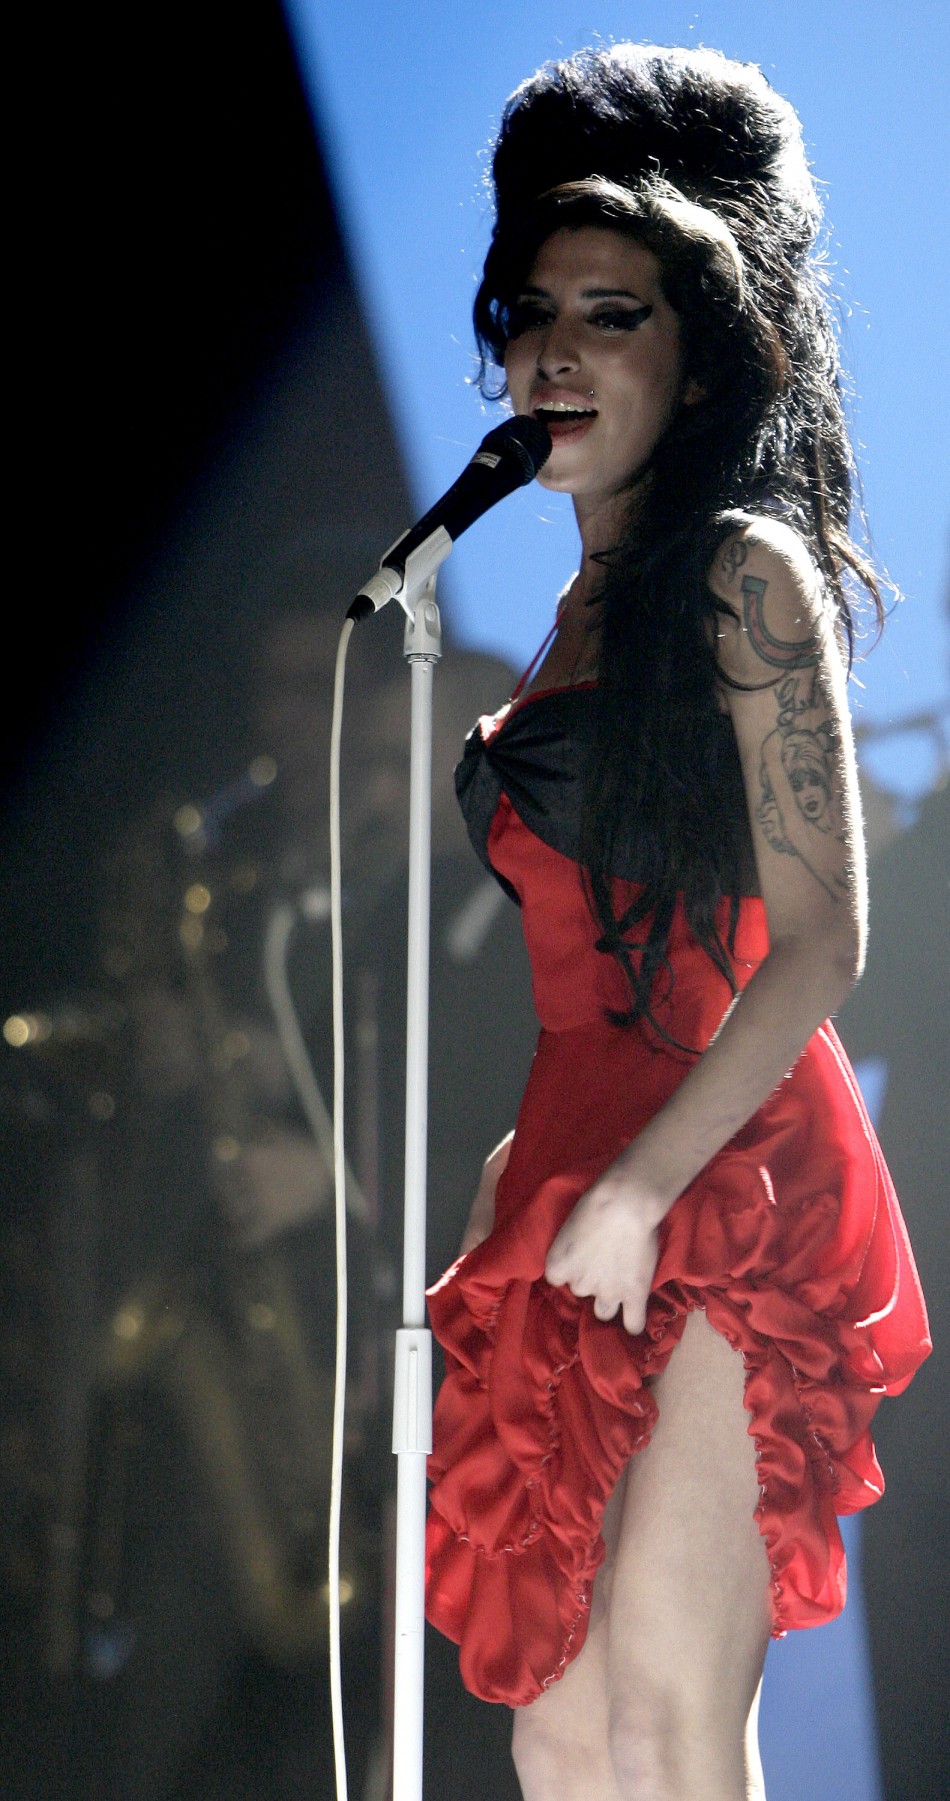 Amy Winehouse Death Inquest: Who Else is in The '27 Club'?